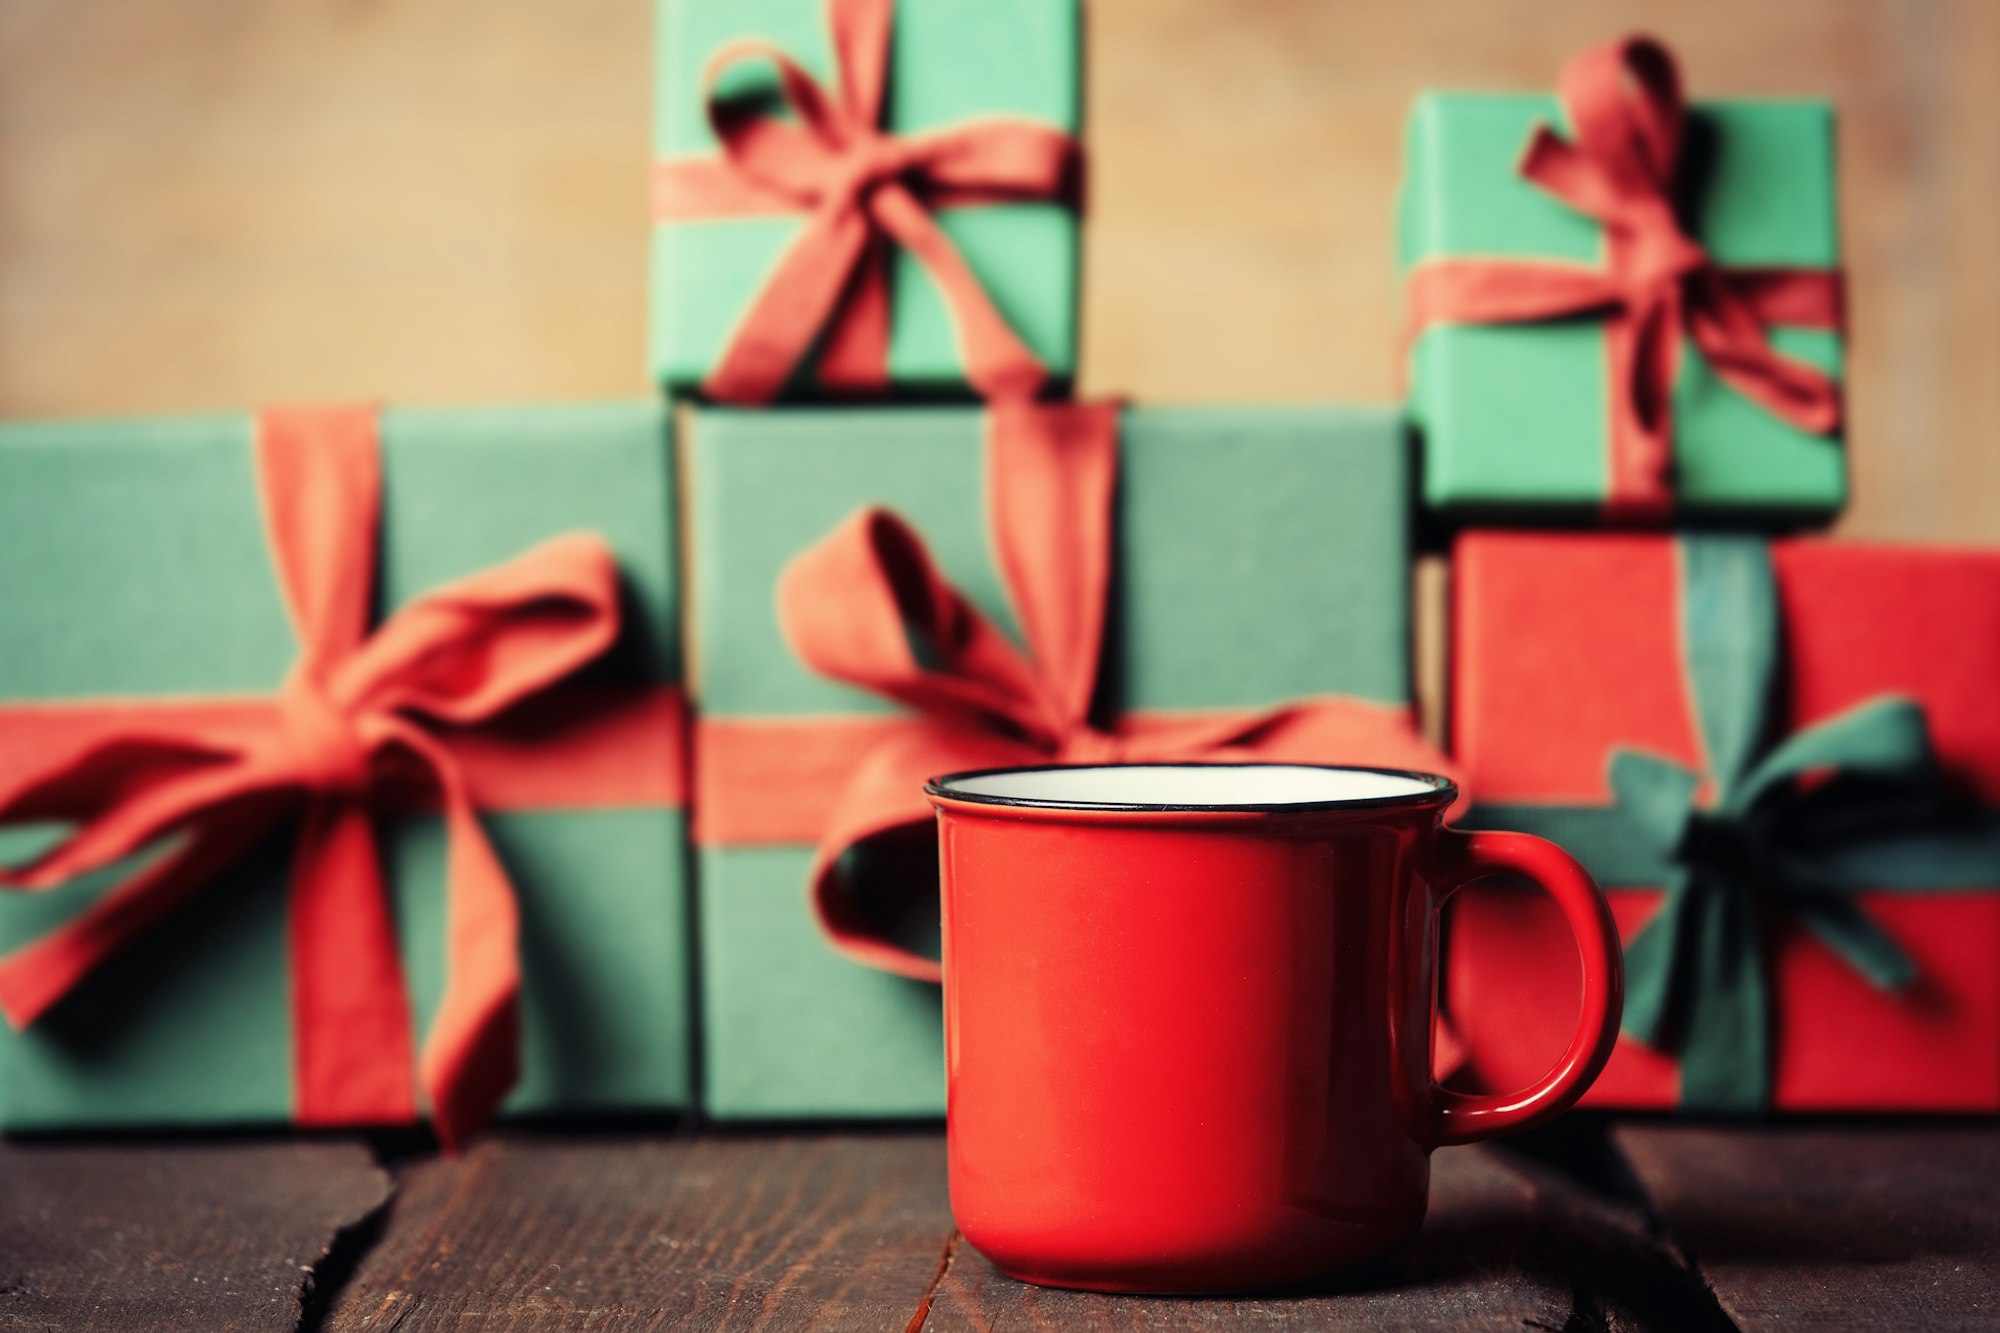 Cup of coffee and Holiday gifts on wooden table